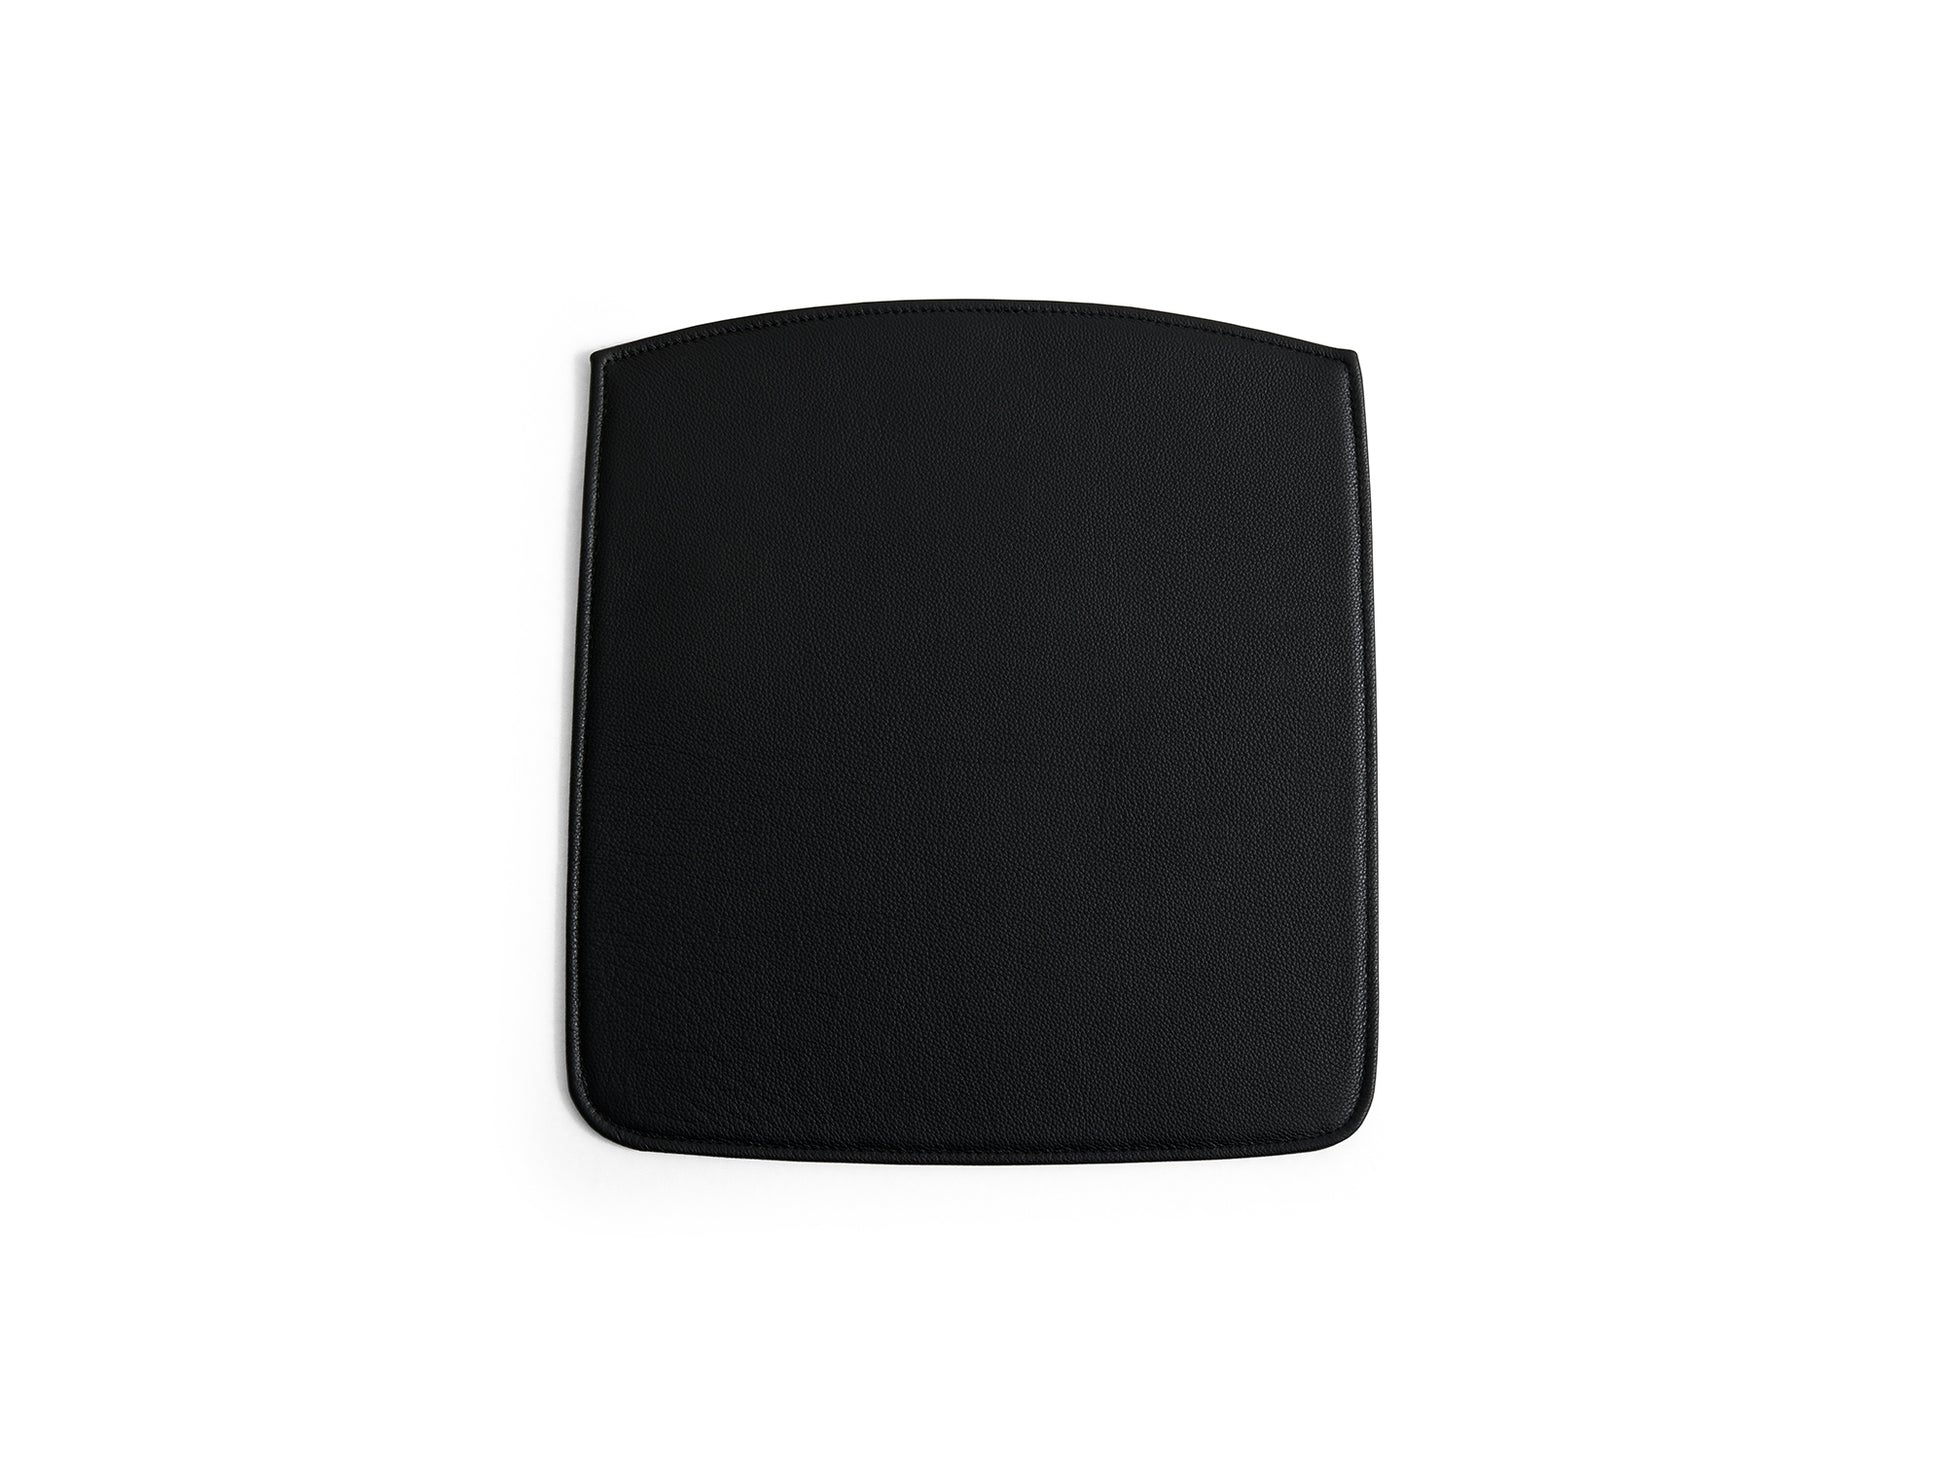 Pastis Chair Seat Pads by HAY - Black Scozia Leather